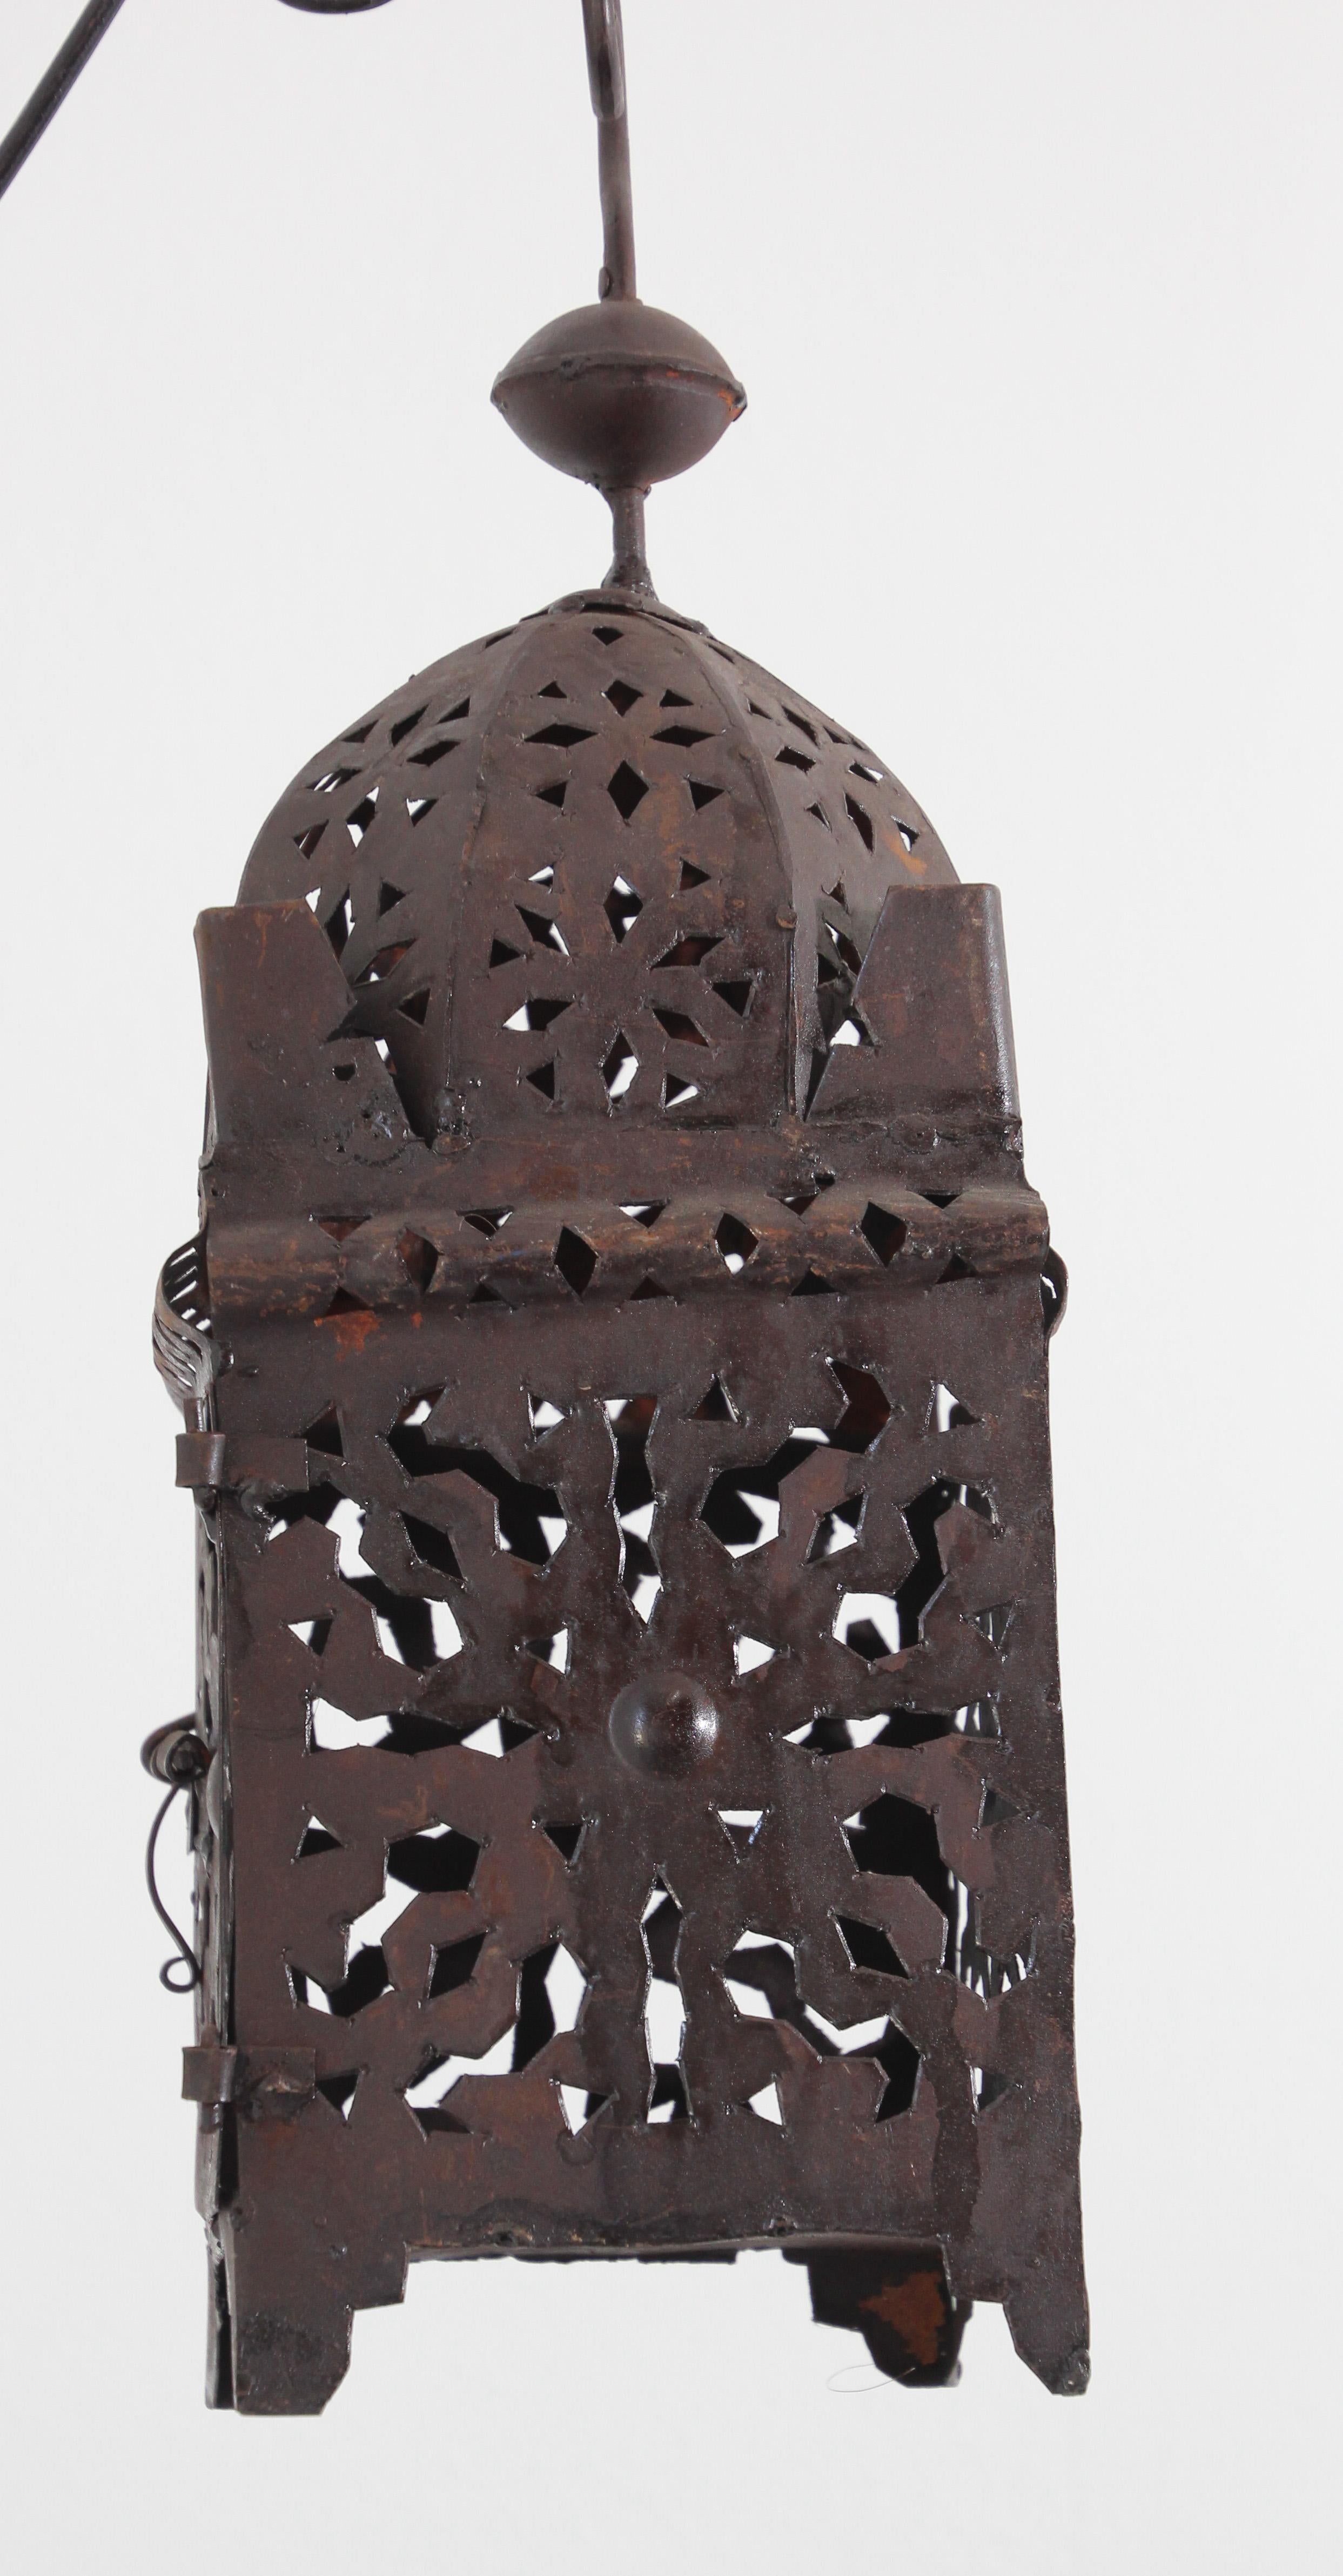 Vintage Moroccan Moorish metal candle lantern with open metal work Moorish design.
Hurricane candle lamp handcrafted in Morocco by artisans, metal hand-cut and hammered with Moorish design, open in front for use with pillar candles.
The lantern